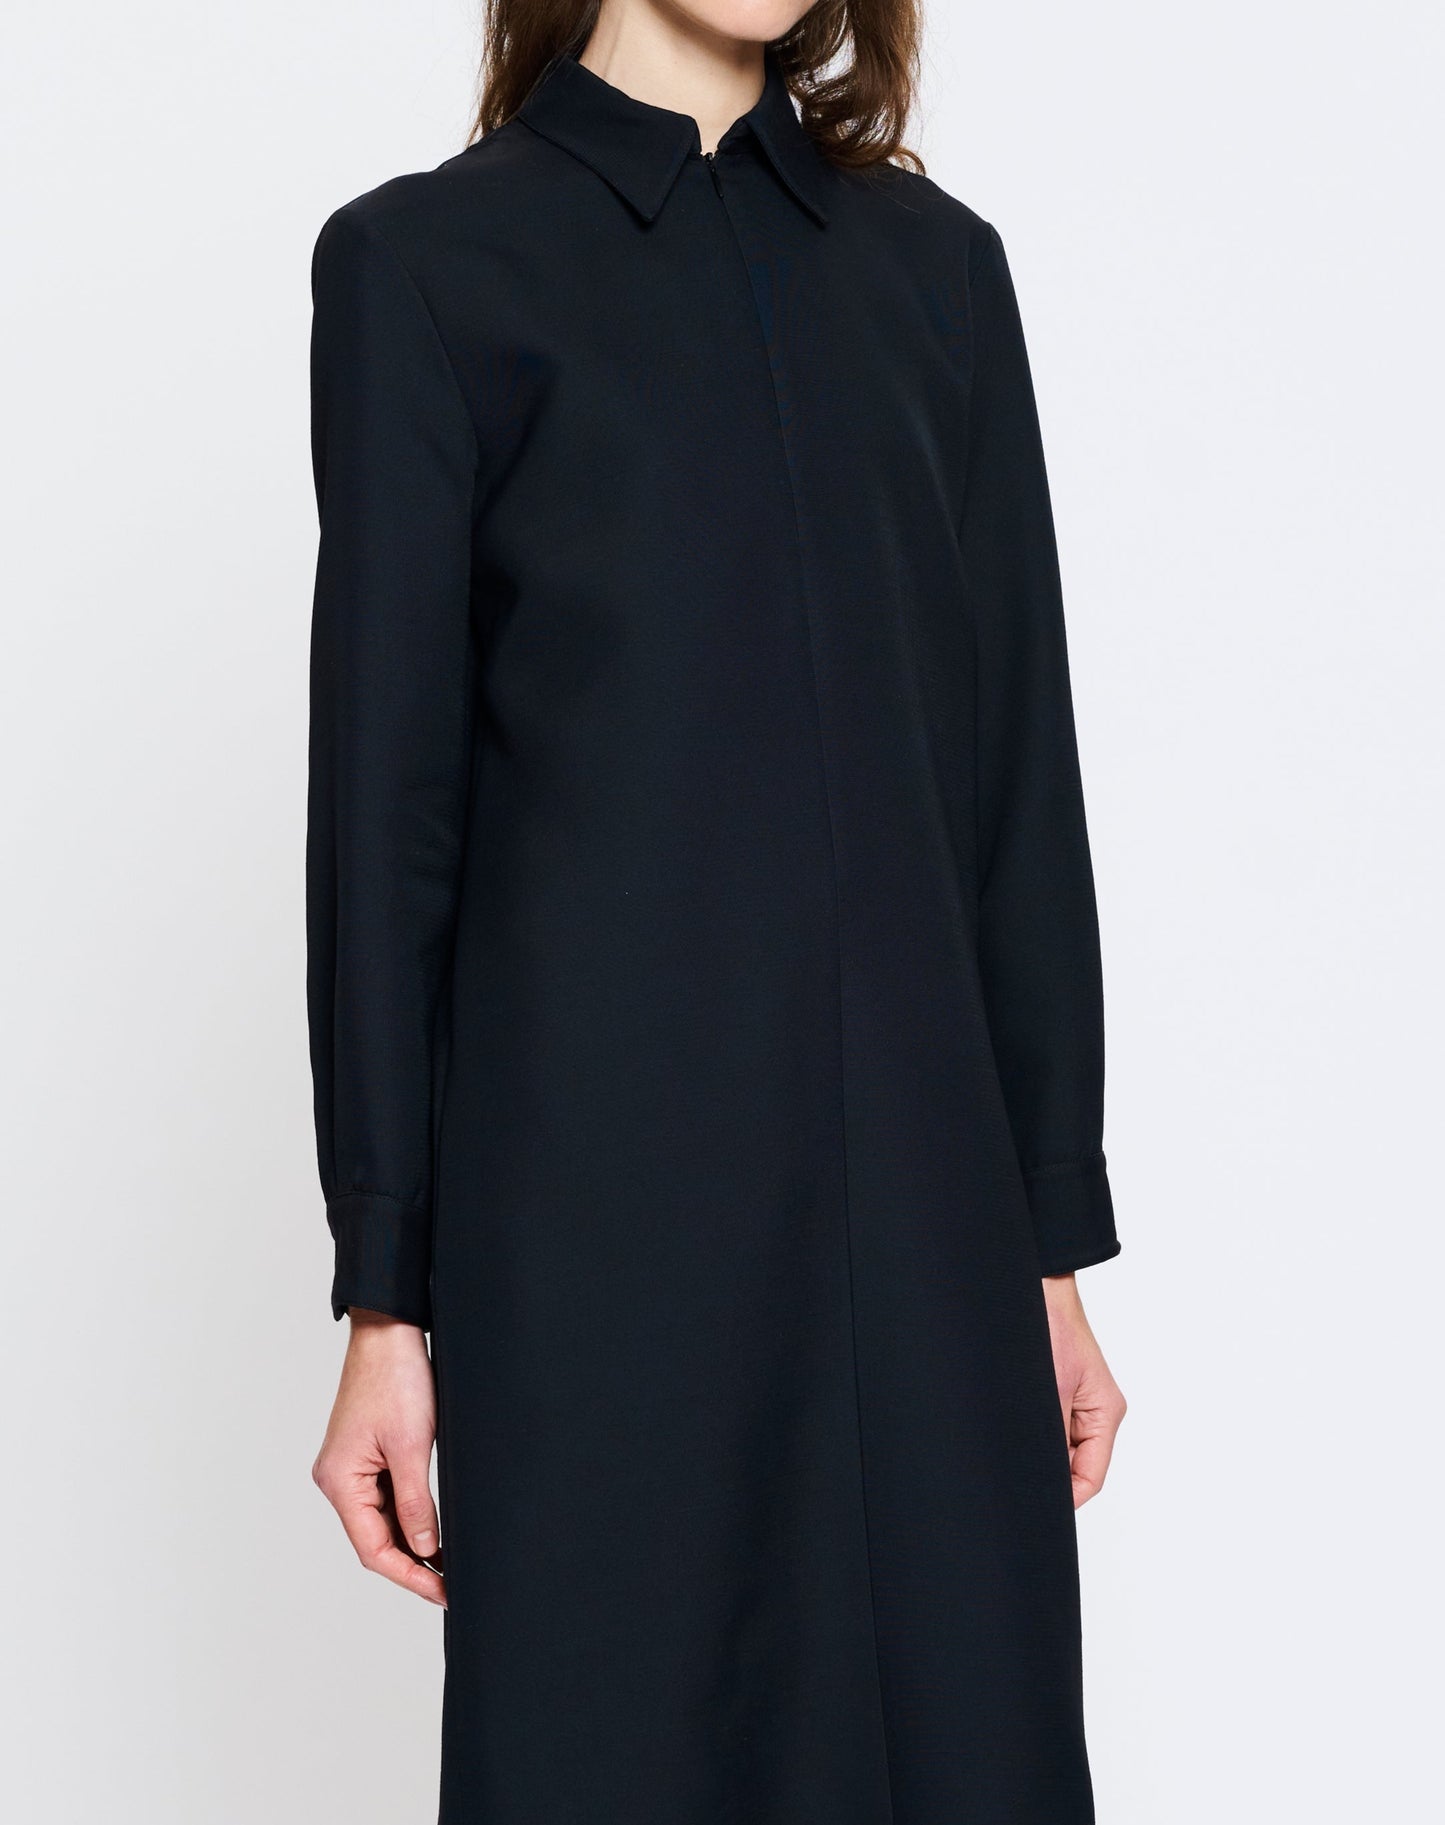 Mable Dress in Black